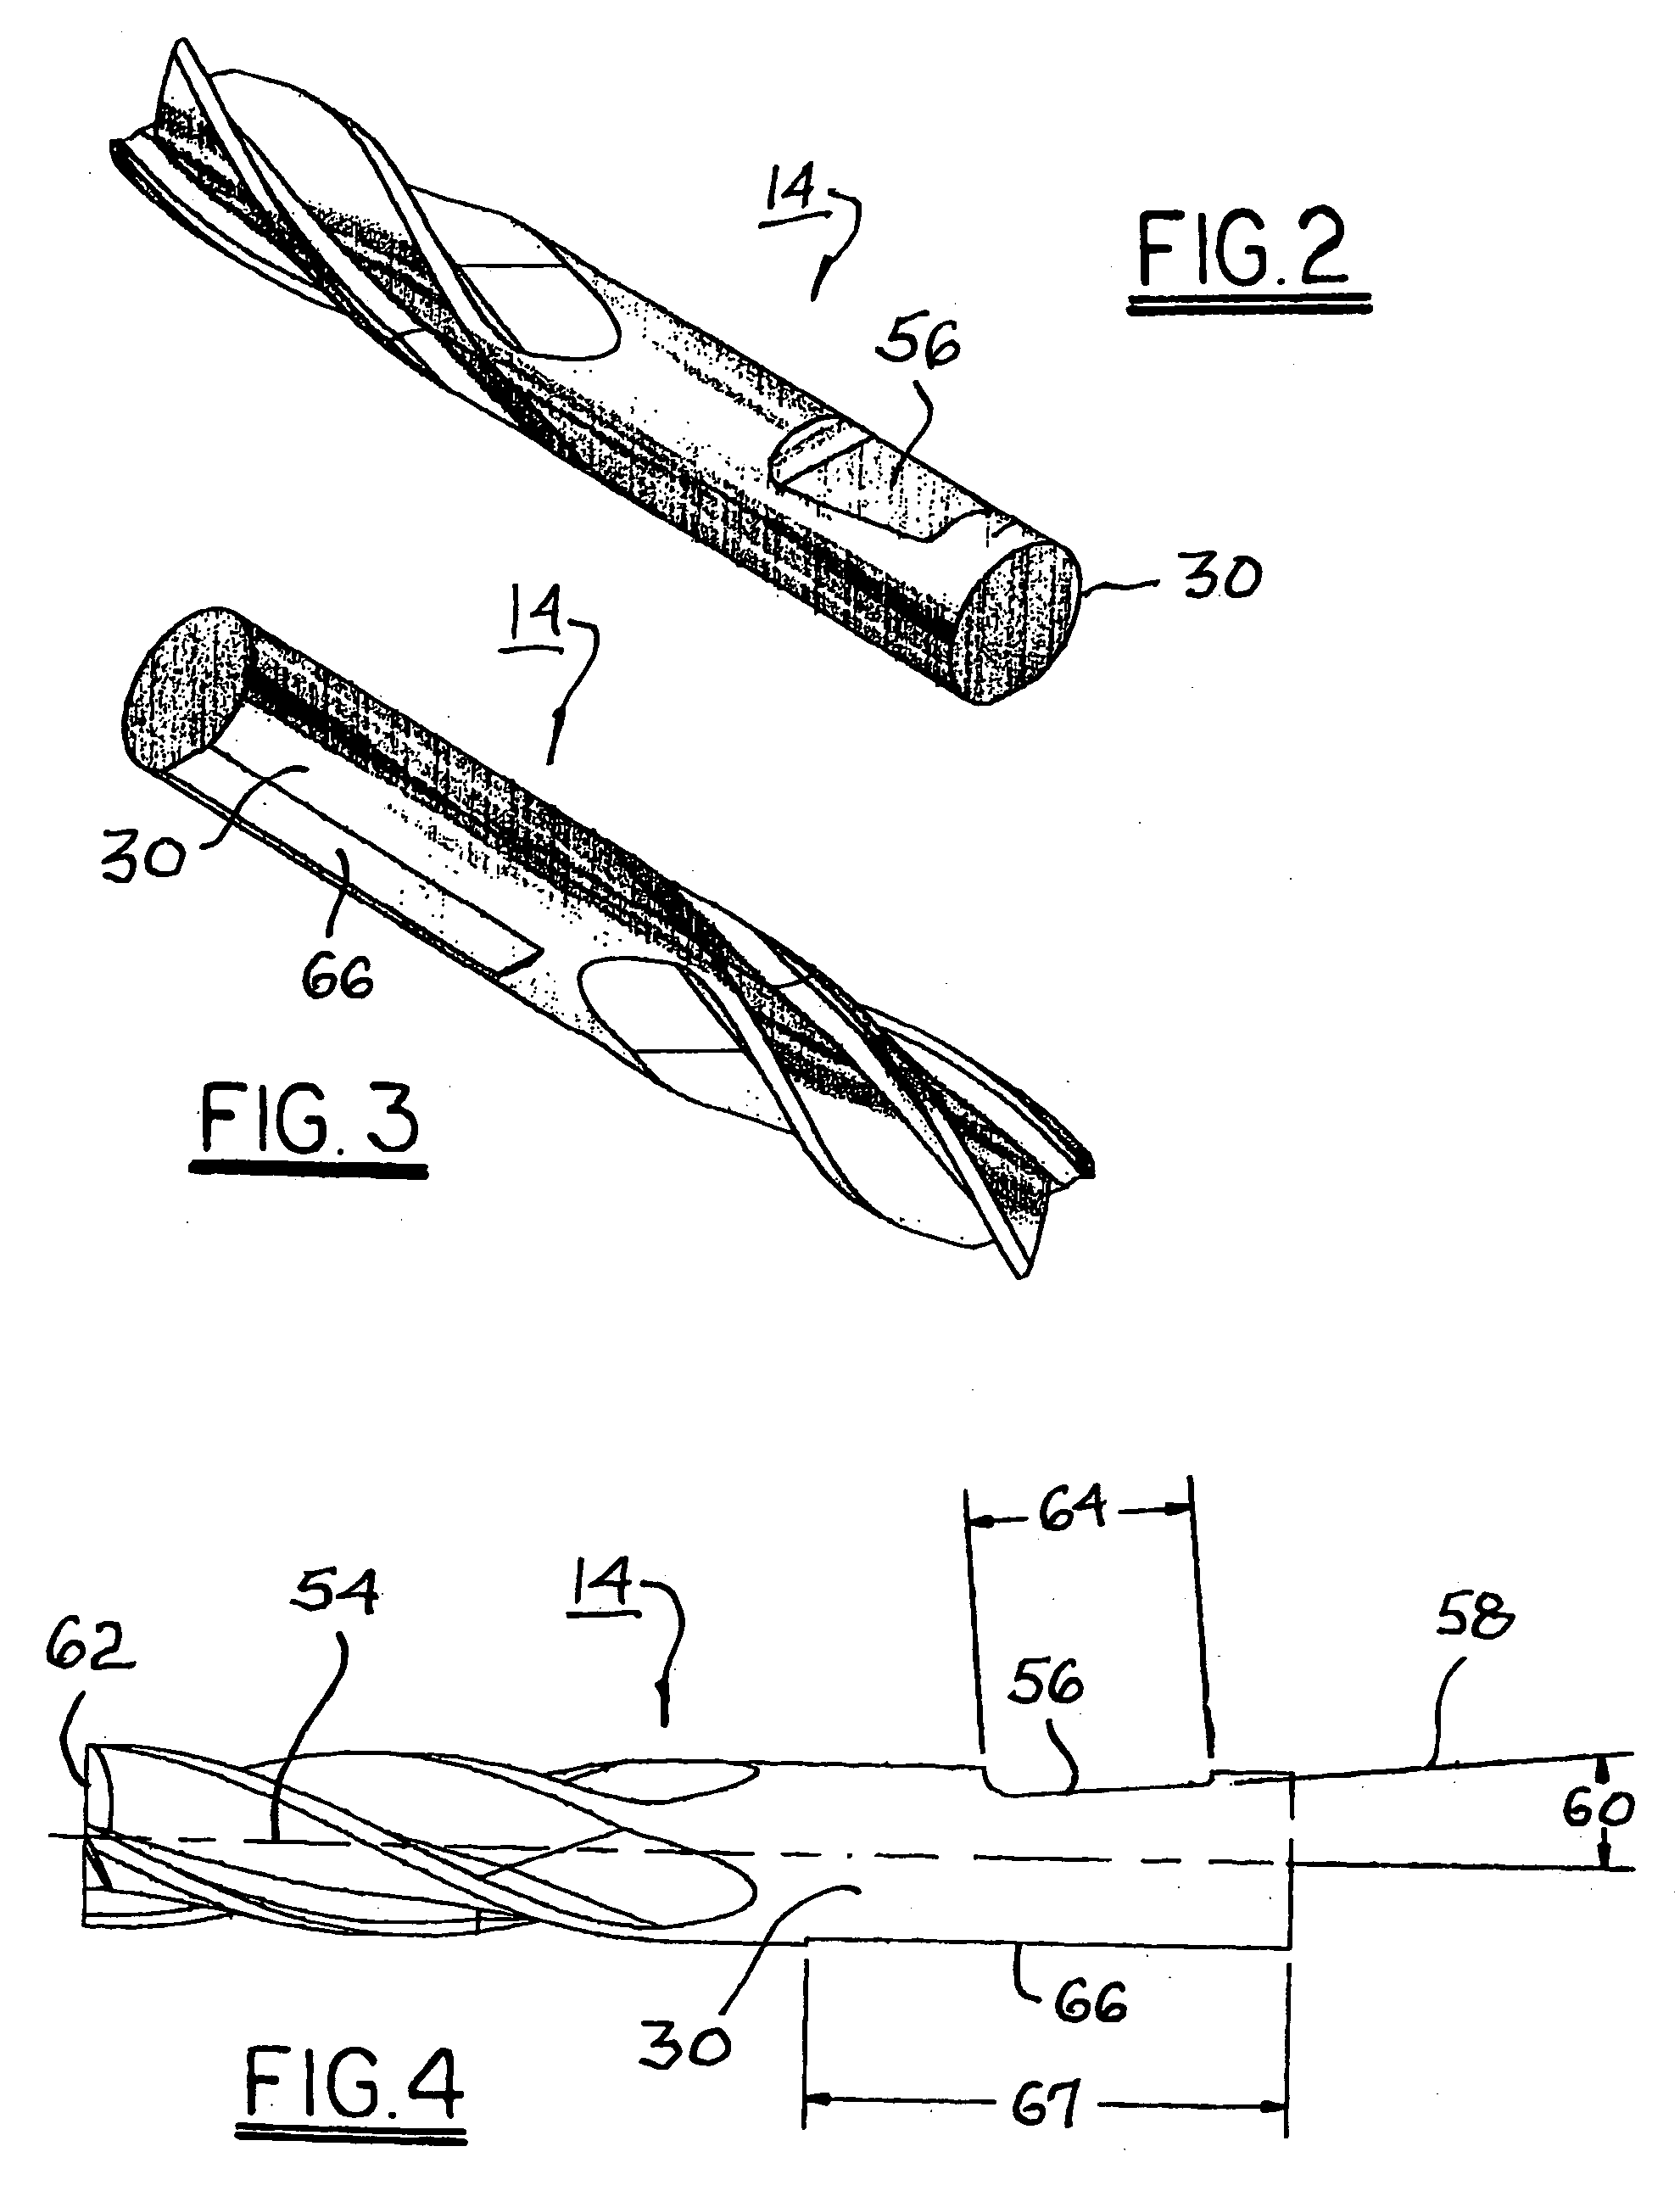 System for mounting a machine tool in a holder